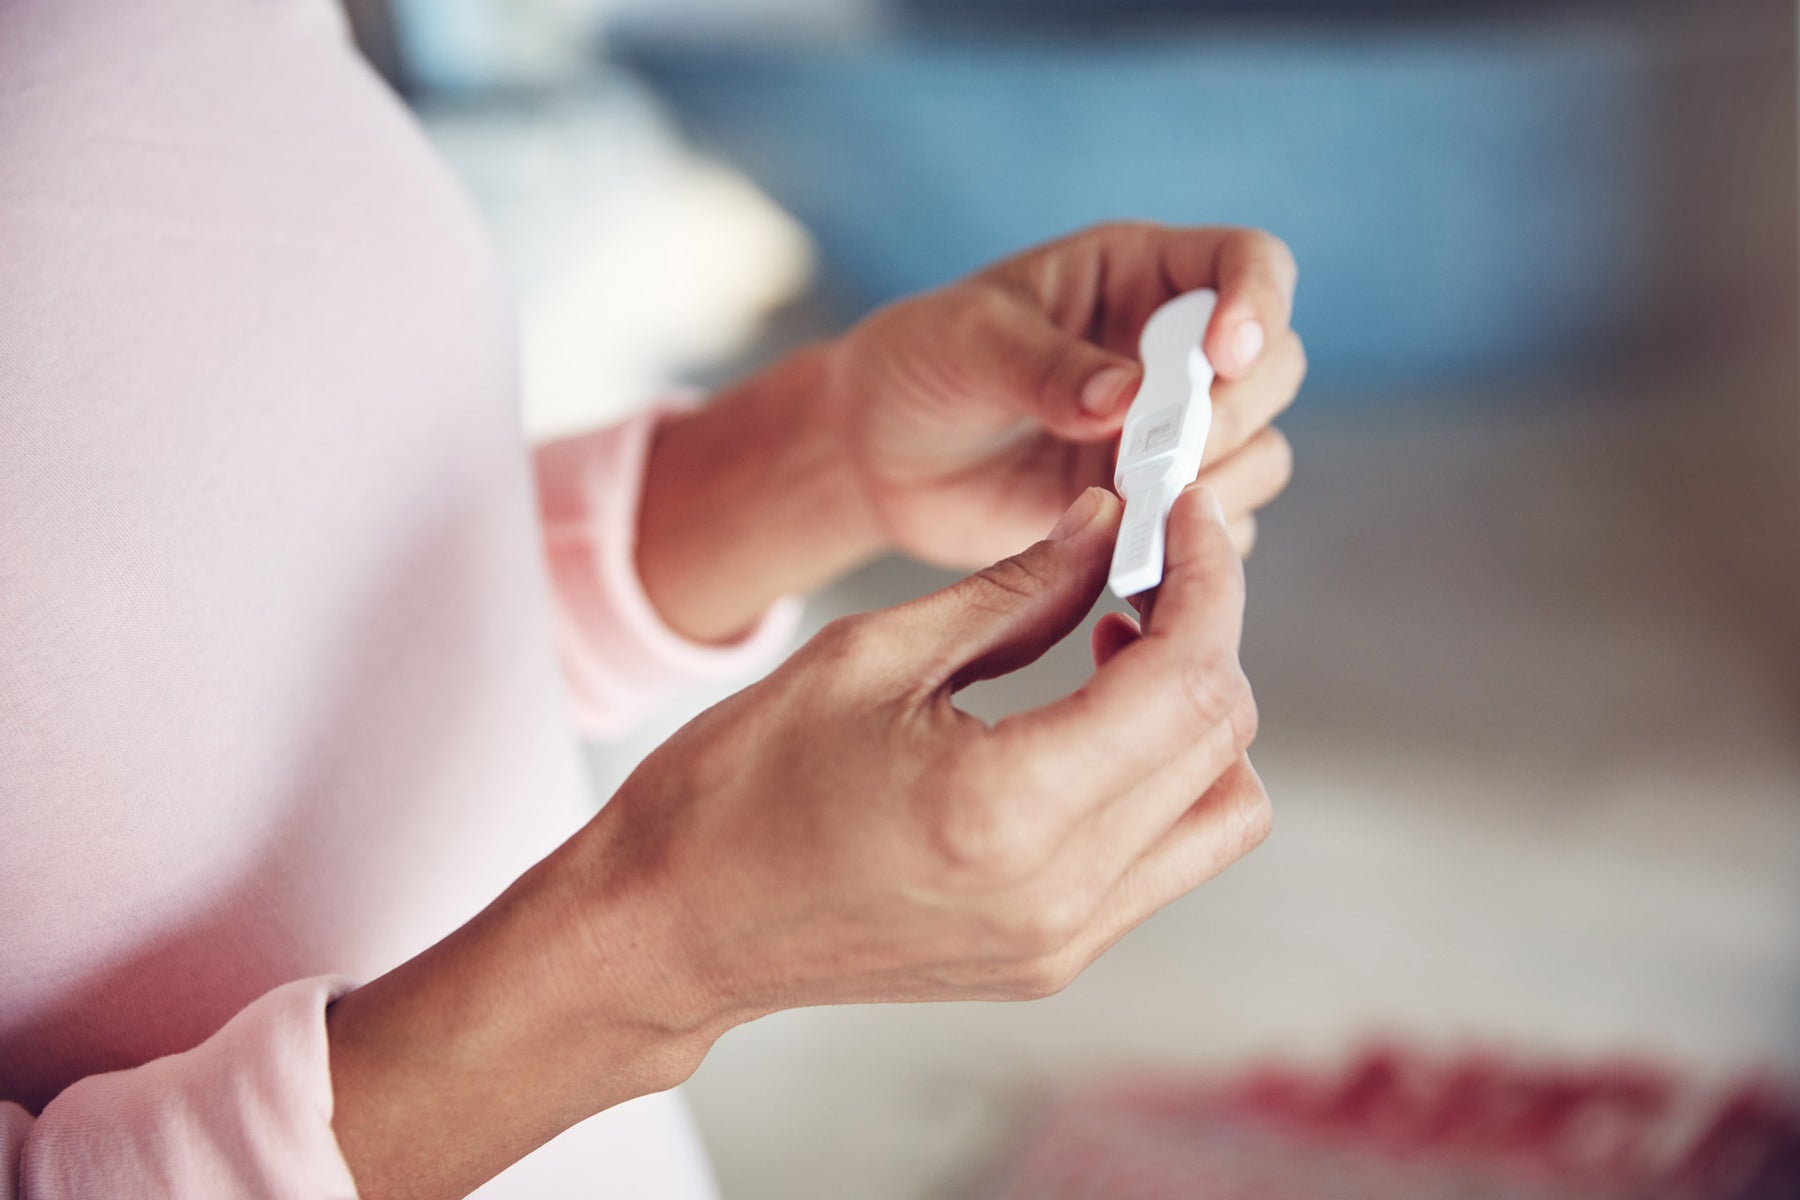 A woman completes an ovulation test to see if she is fertile.